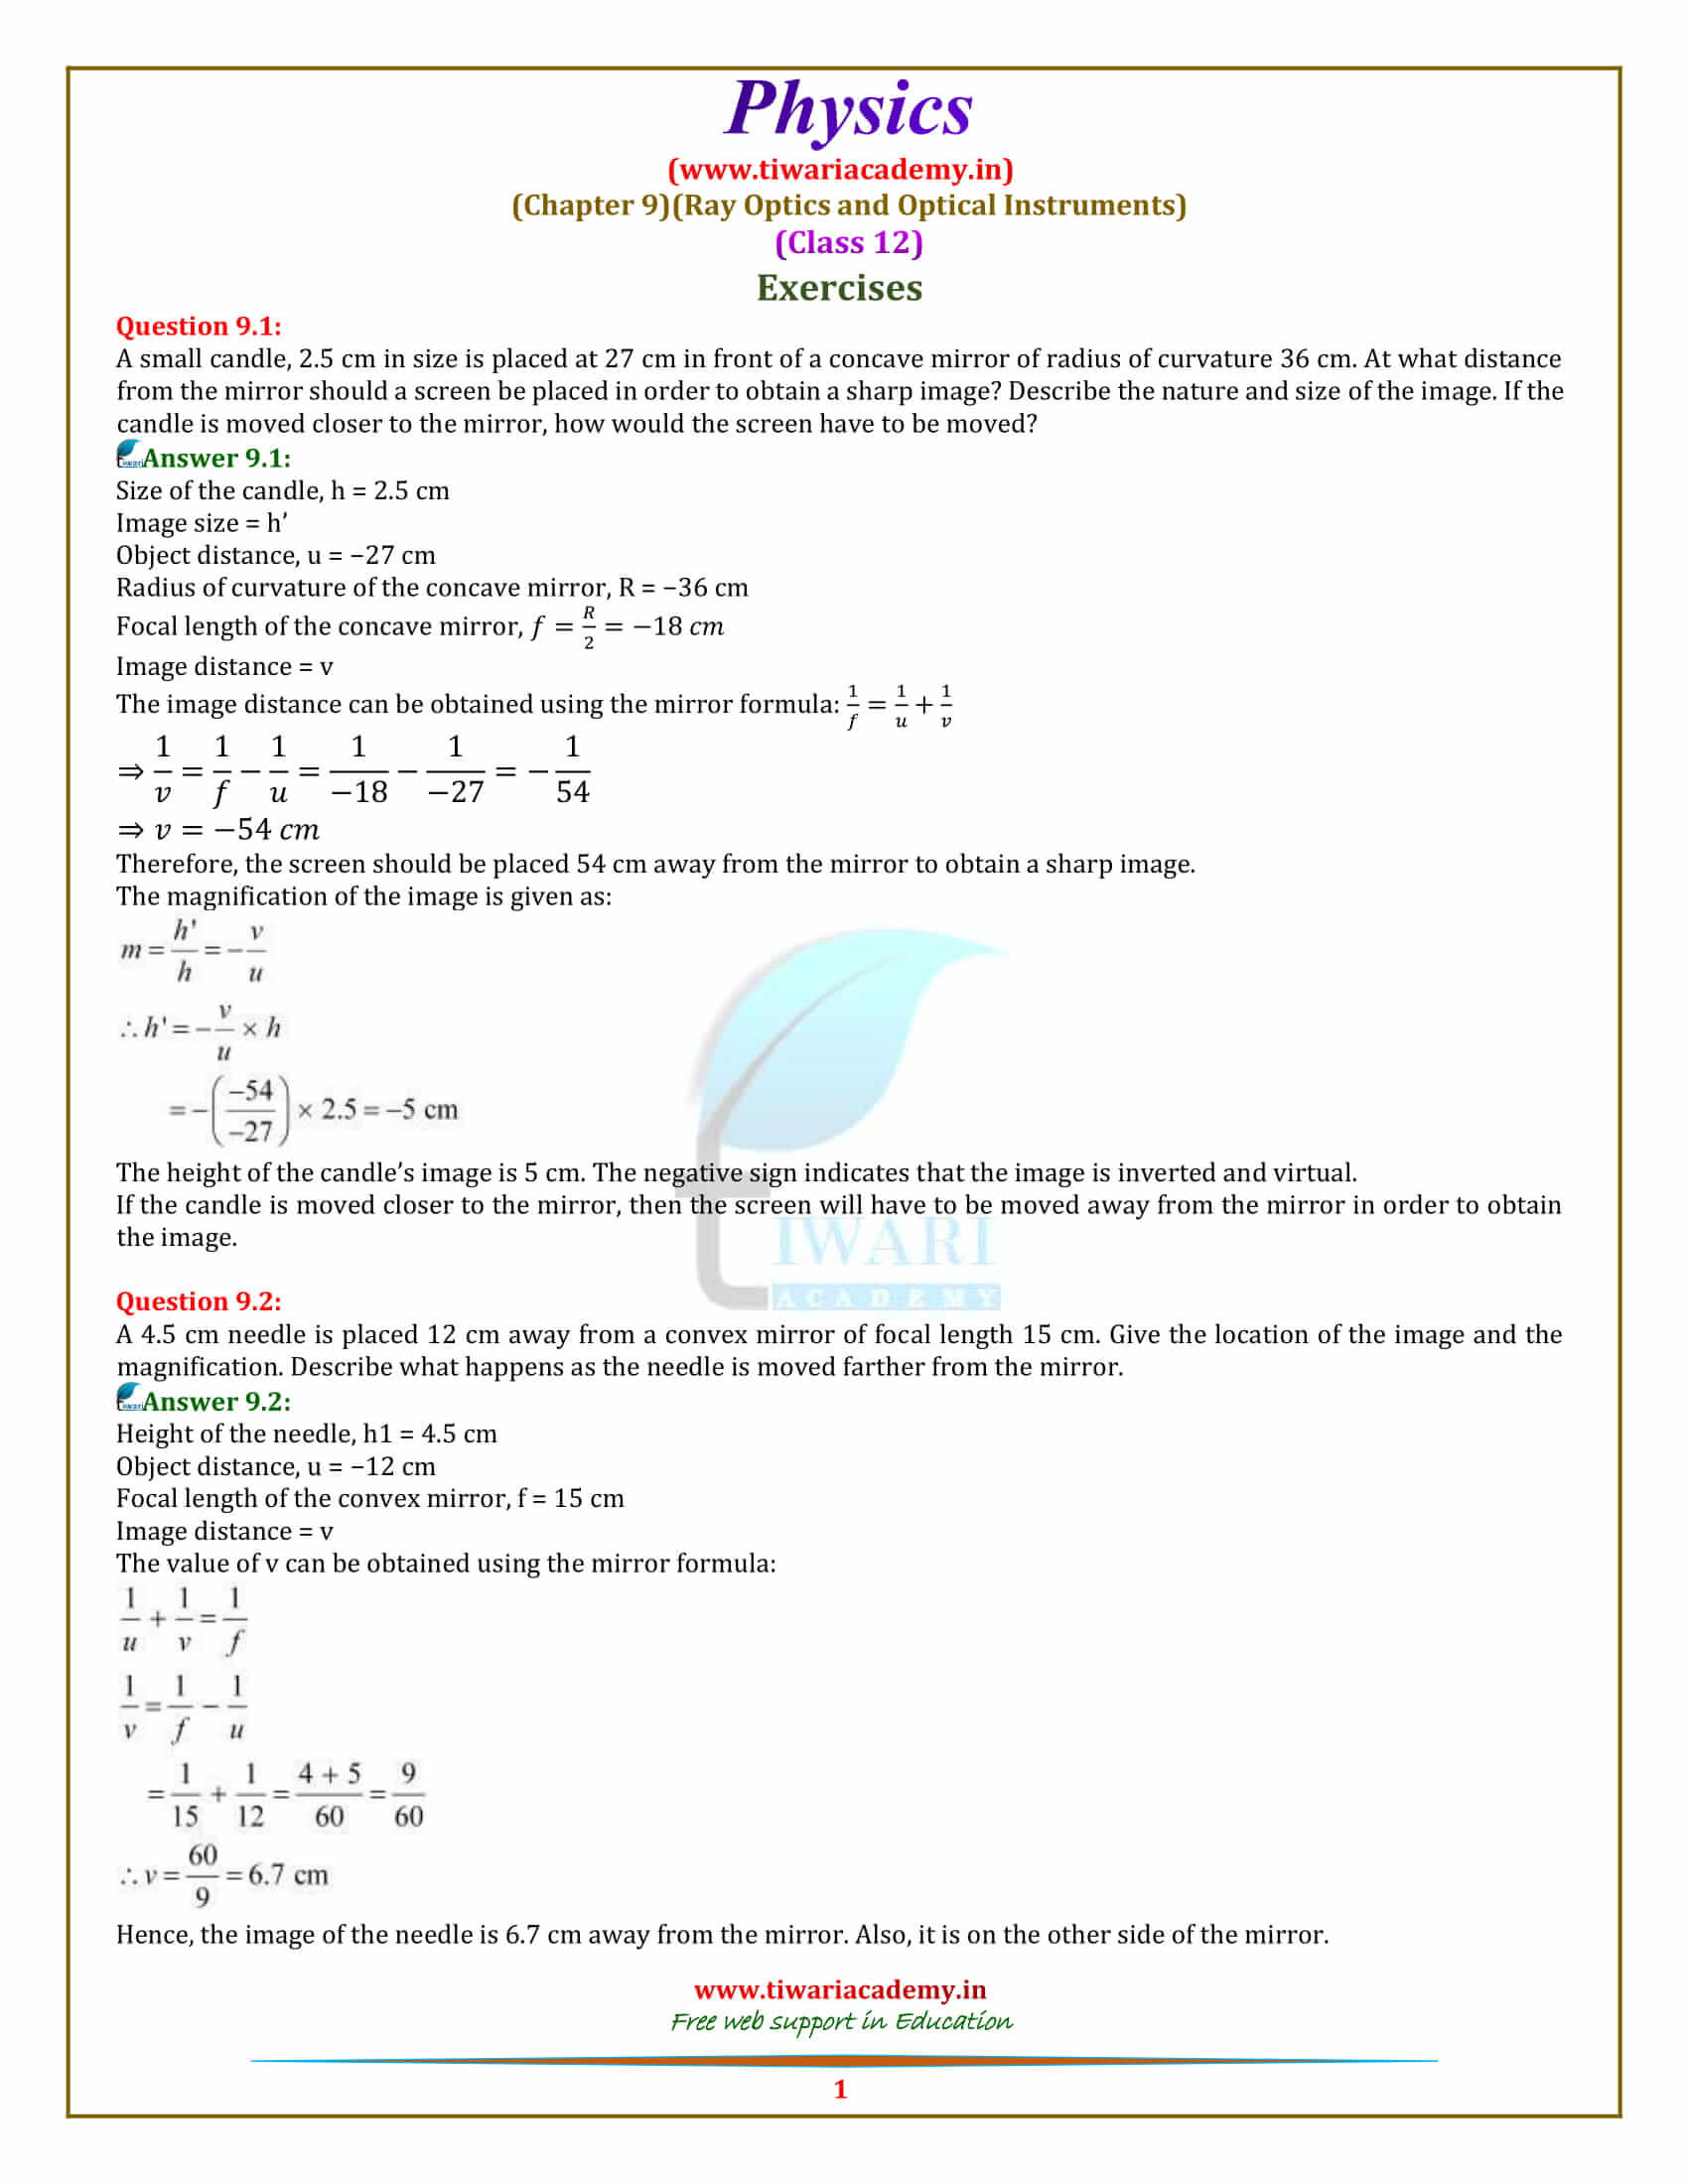 NCERT Solutions for Class 12 Physics Chapter 9 Ray Optics and Optical Instruments